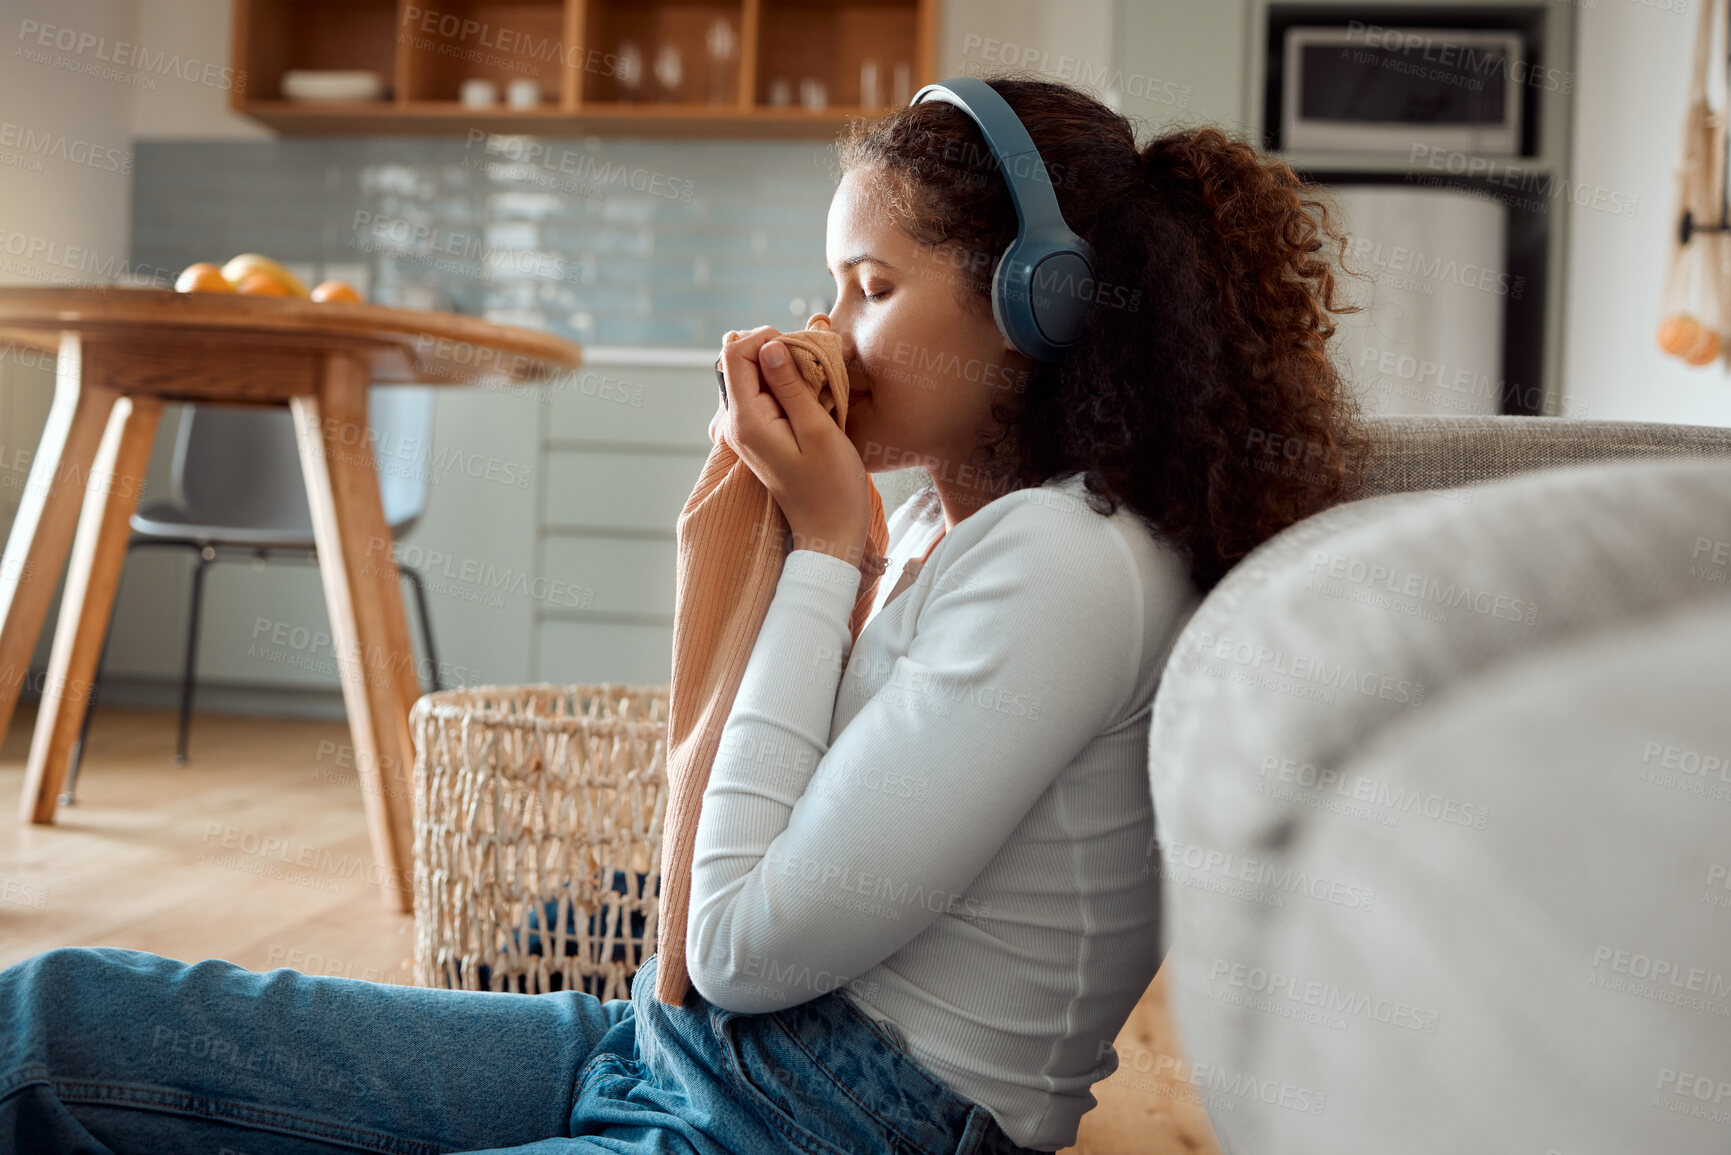 Buy stock photo Young woman listening to music in headphones. Young woman enjoying the smell of fresh laundry. Woman smelling fragrant clean clothing. Housework smells so good. A clean house always smells good